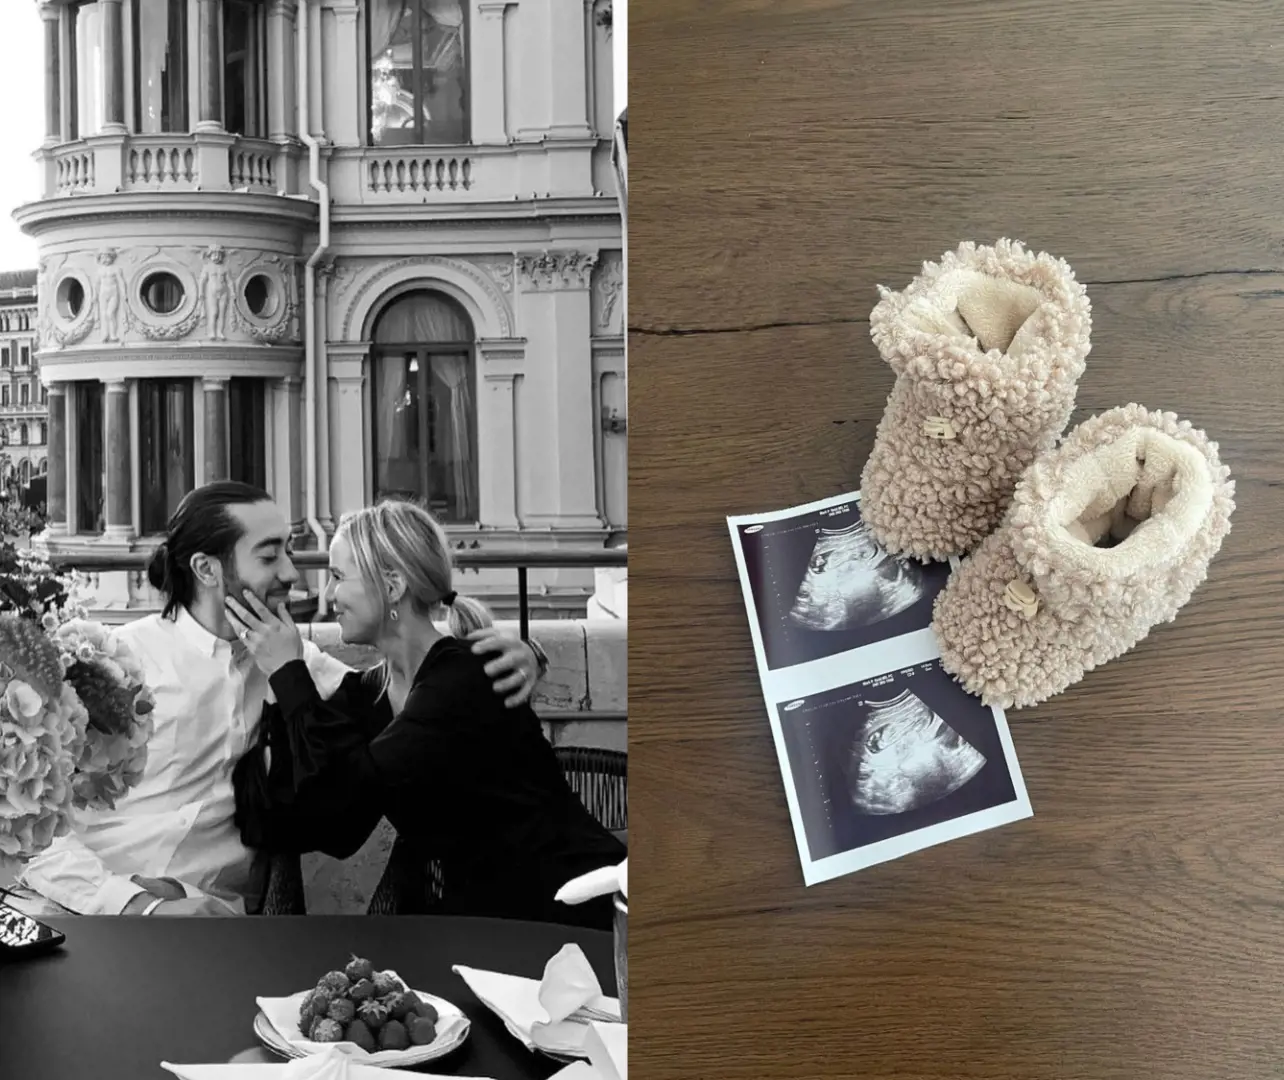 Mika and Irma are expecting a baby girl in 2023 as they share ultrasound image.